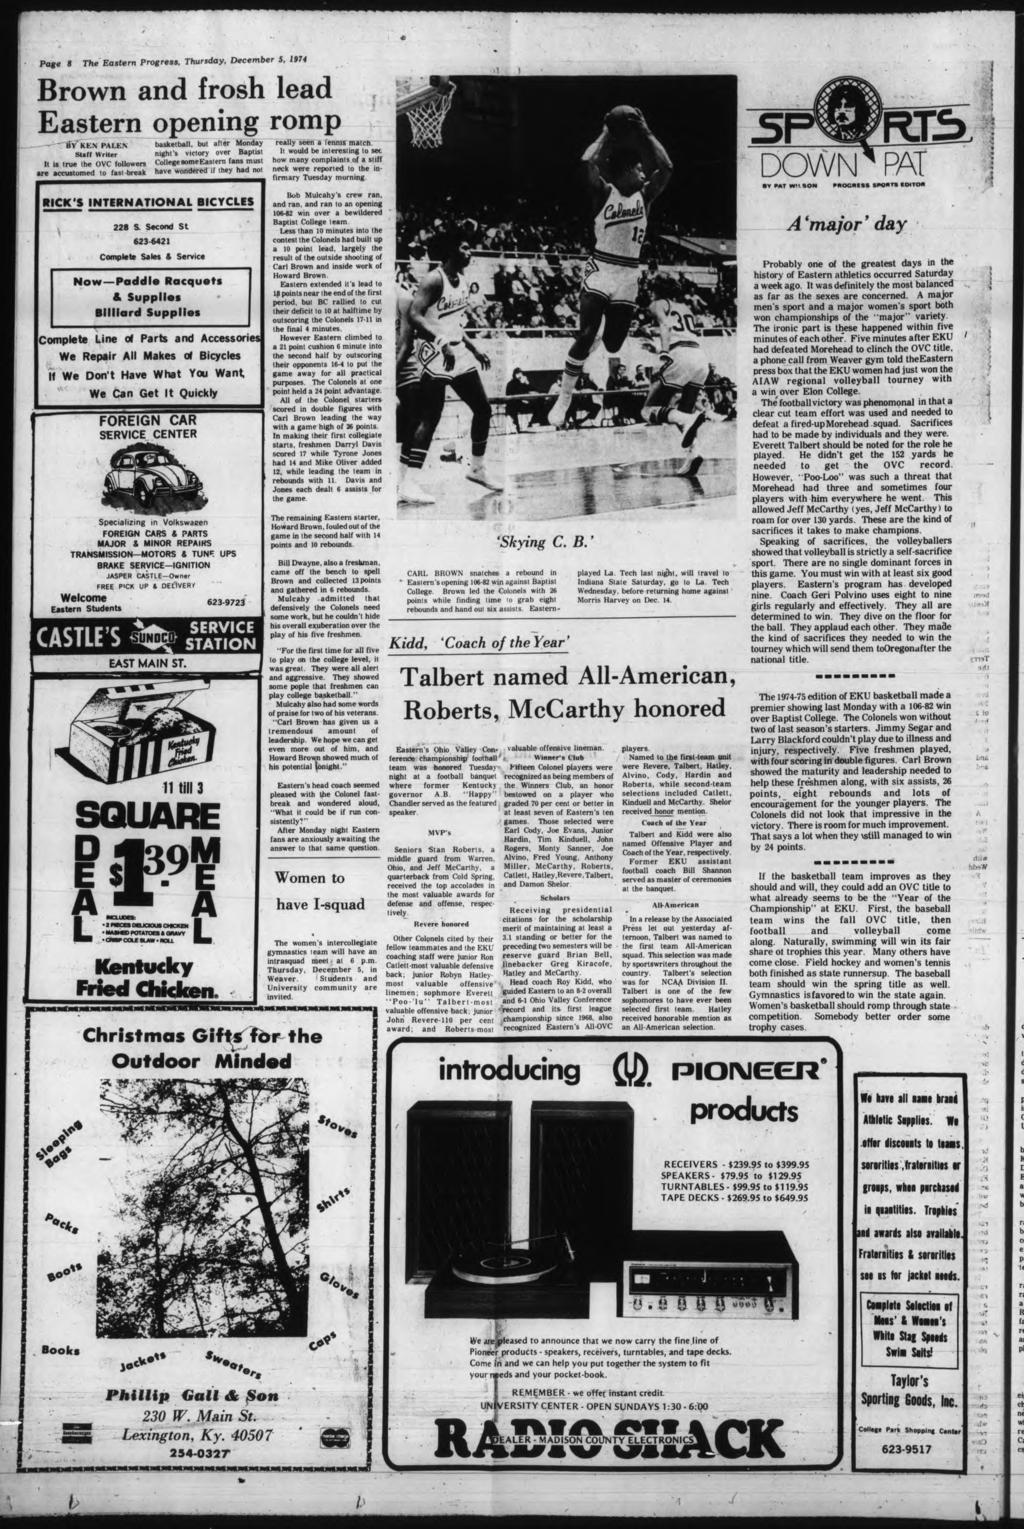 Page 8 The Eastern Progress. Thursday, December 5, 1974 Brown and frosh lead Eastern openng romp - BY KEN PA1.